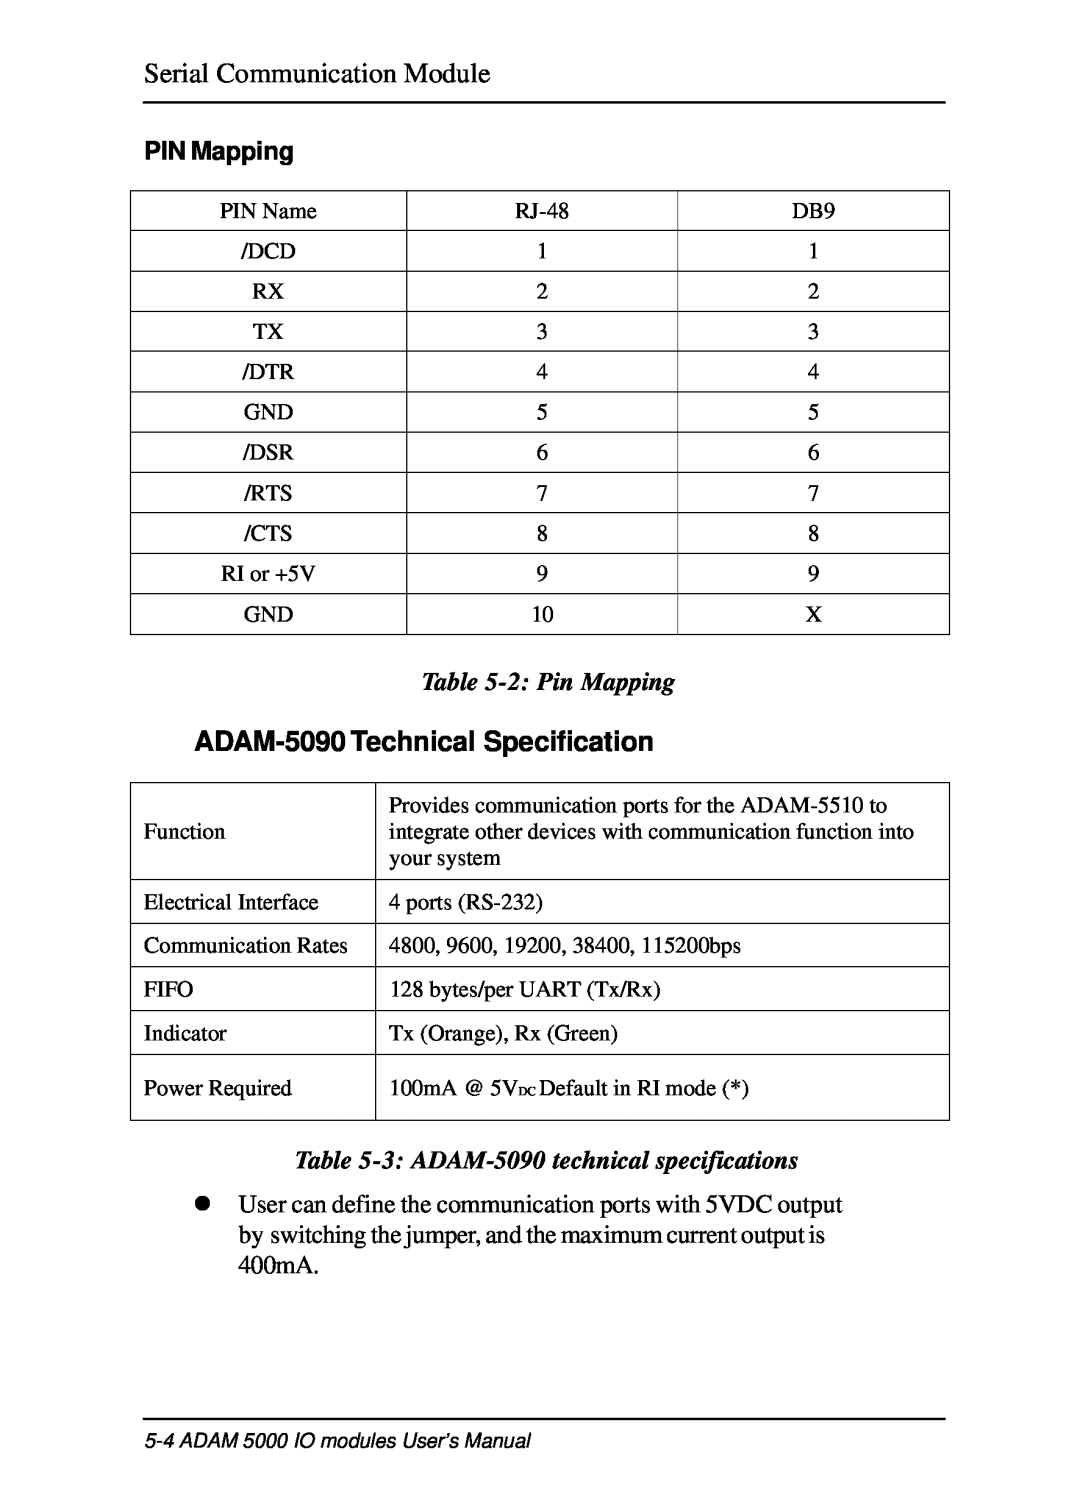 B&B Electronics 5000 Series ADAM-5090 Technical Specification, PIN Mapping, 2 Pin Mapping, Serial Communication Module 